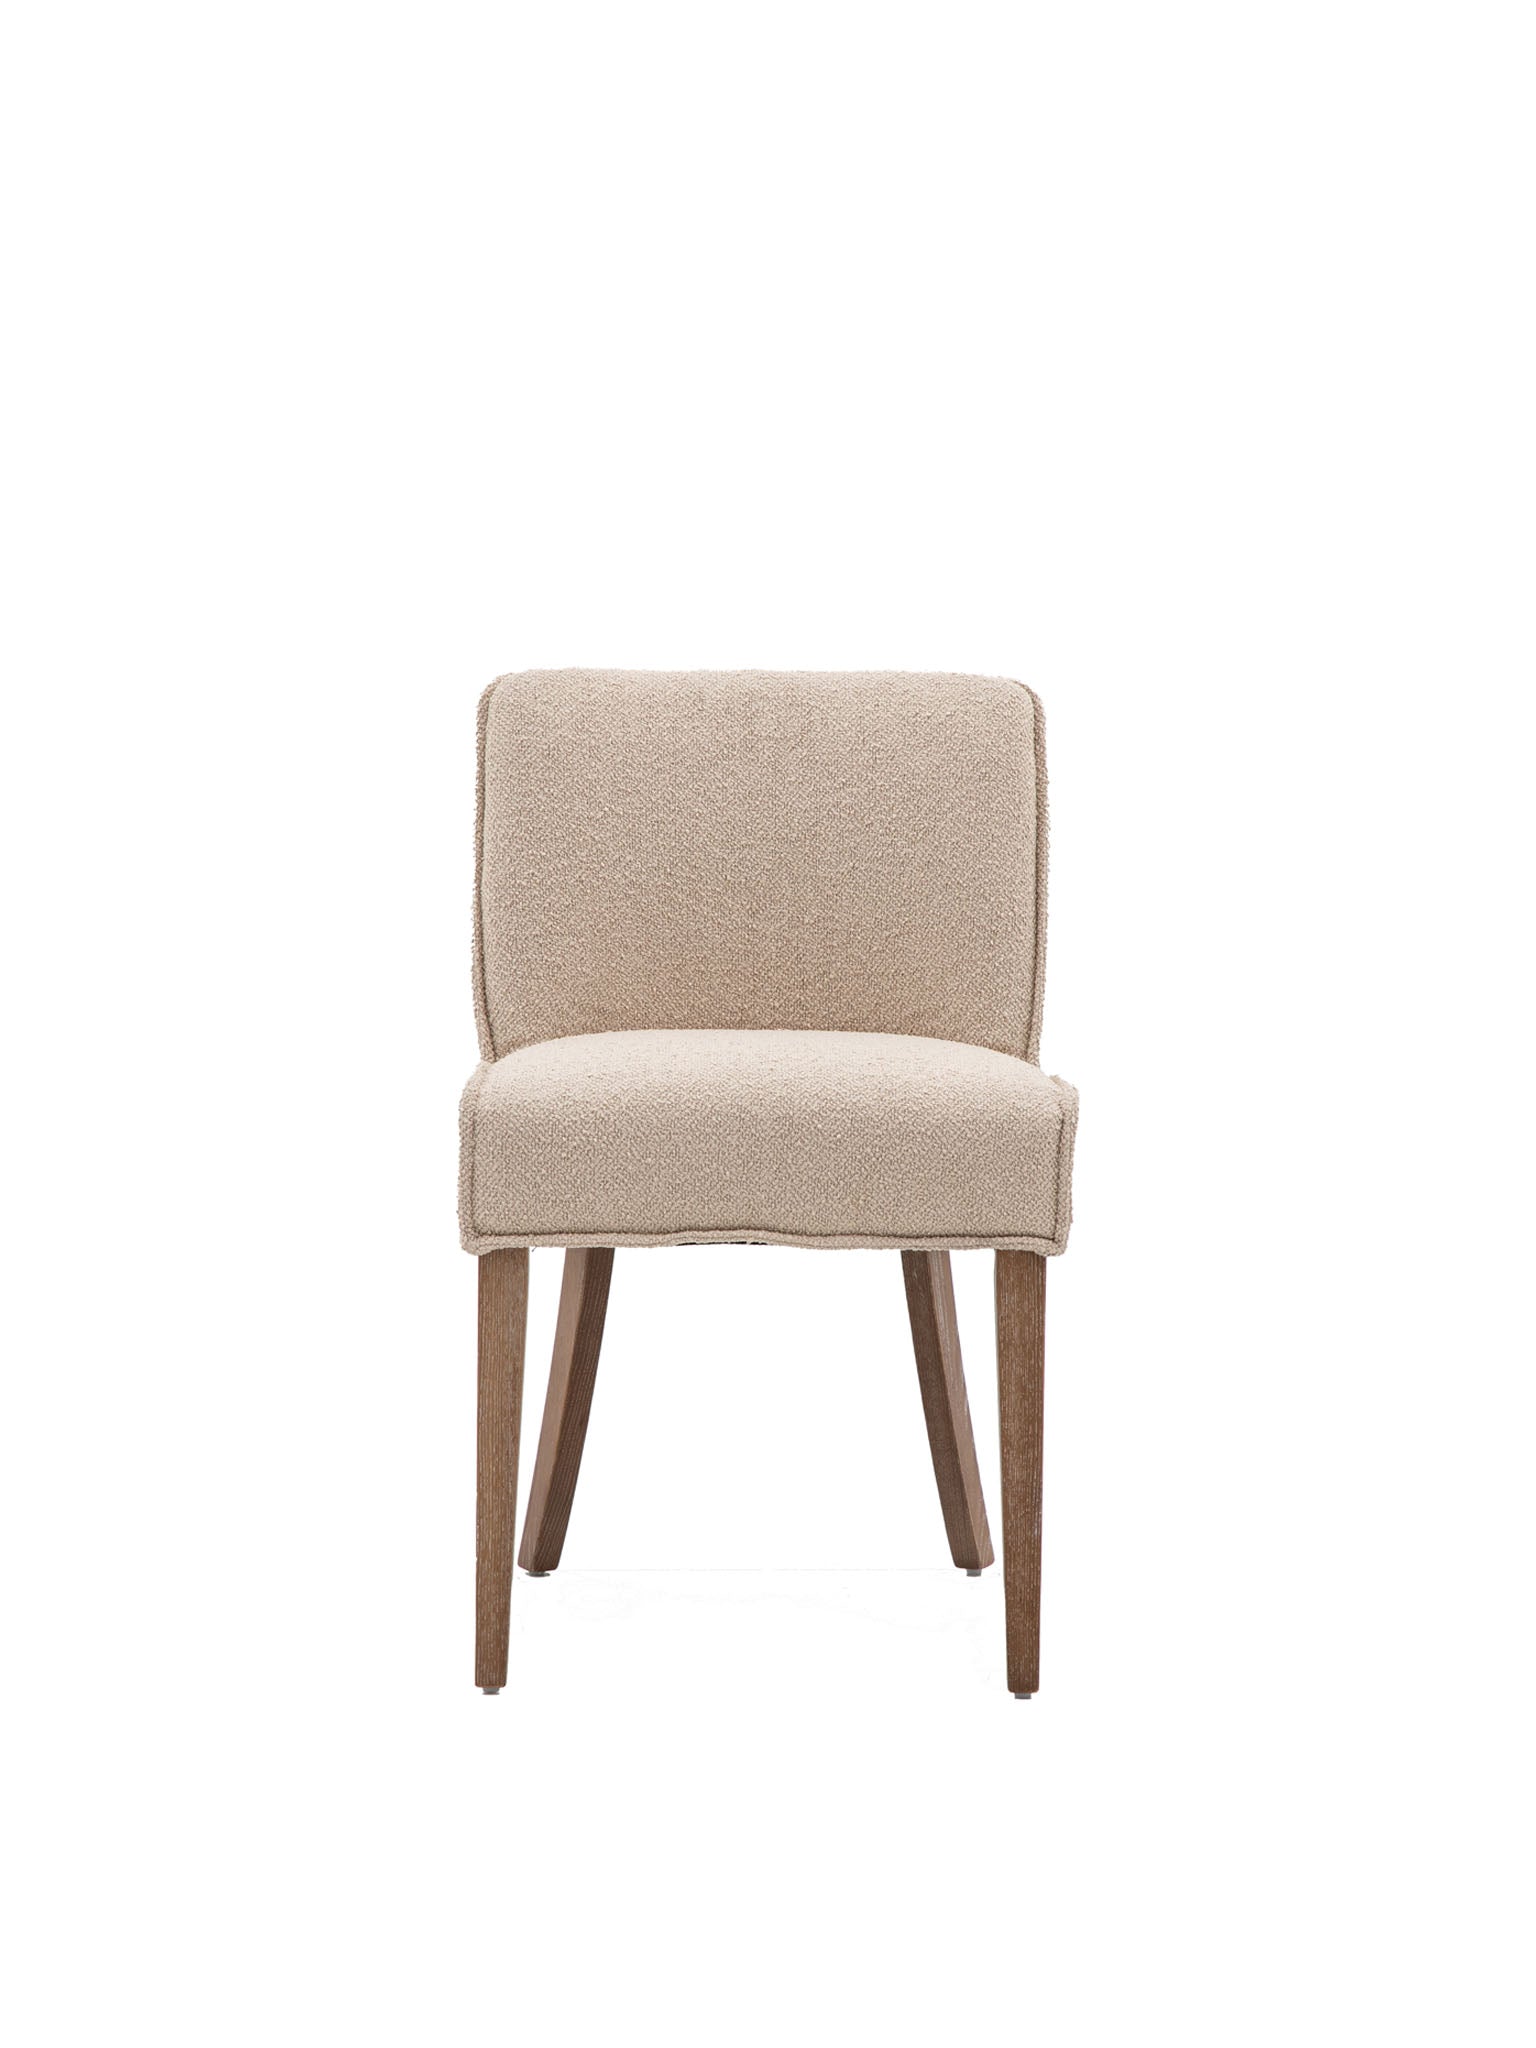 Dining Chair with oak legs and natural linen upholstry